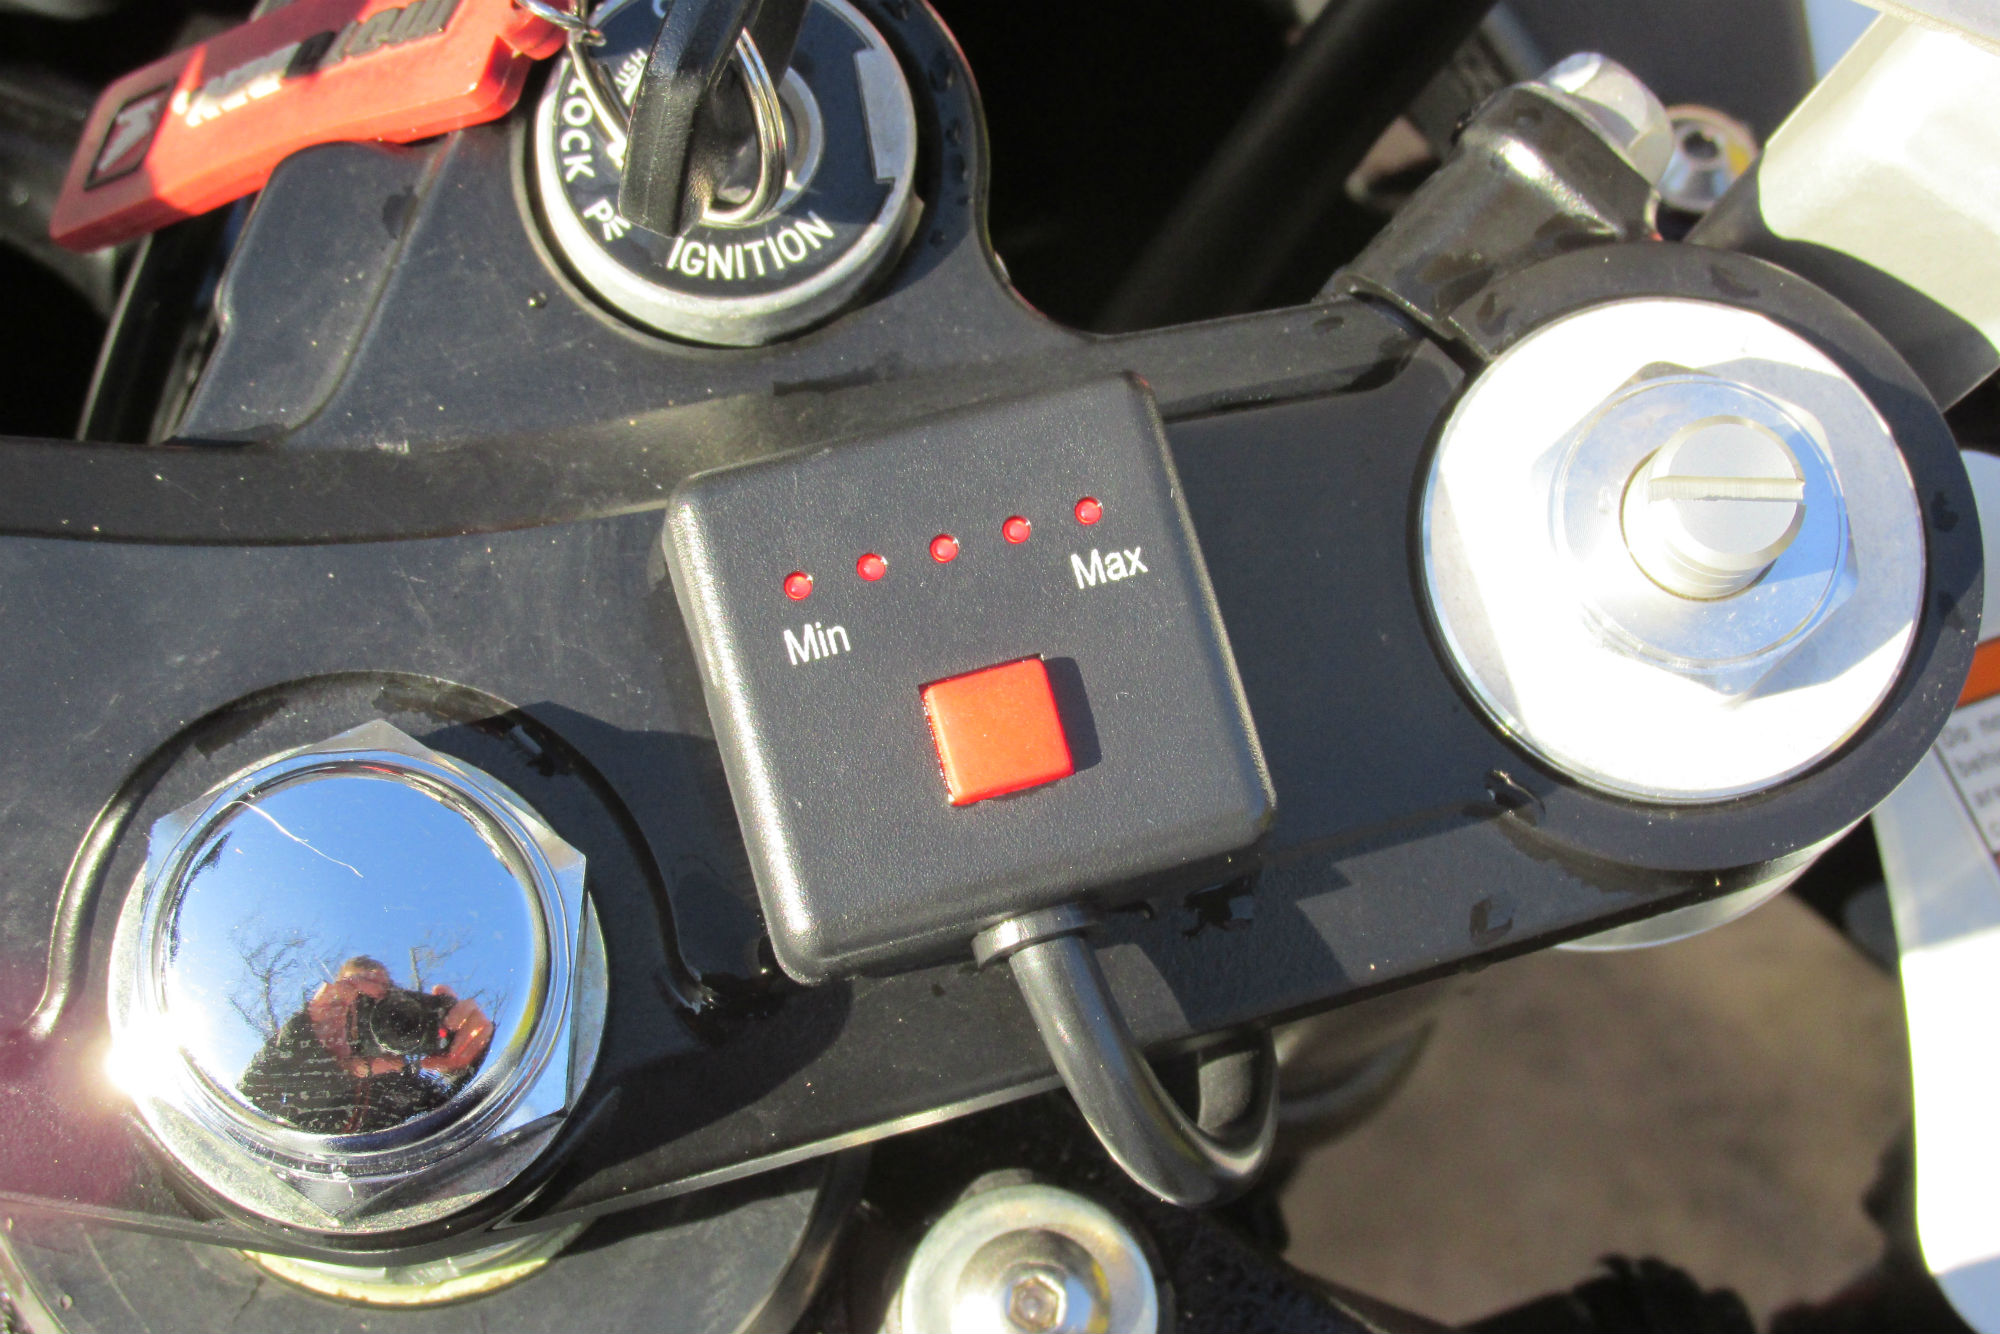 Used review: R&G heated grips, £40